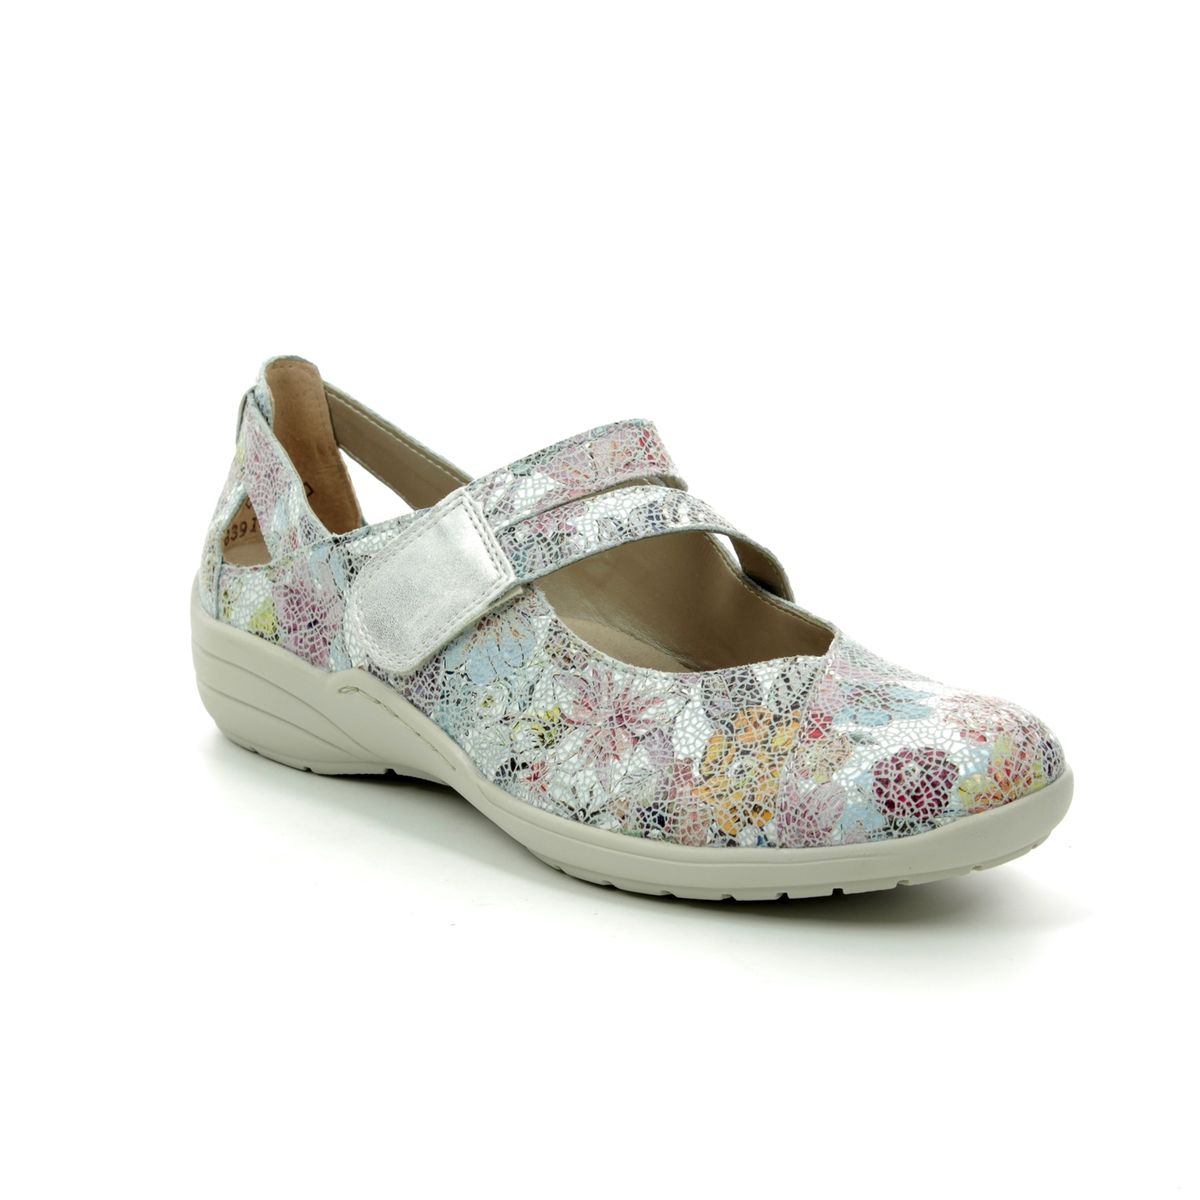 converse floral mary jane shoes